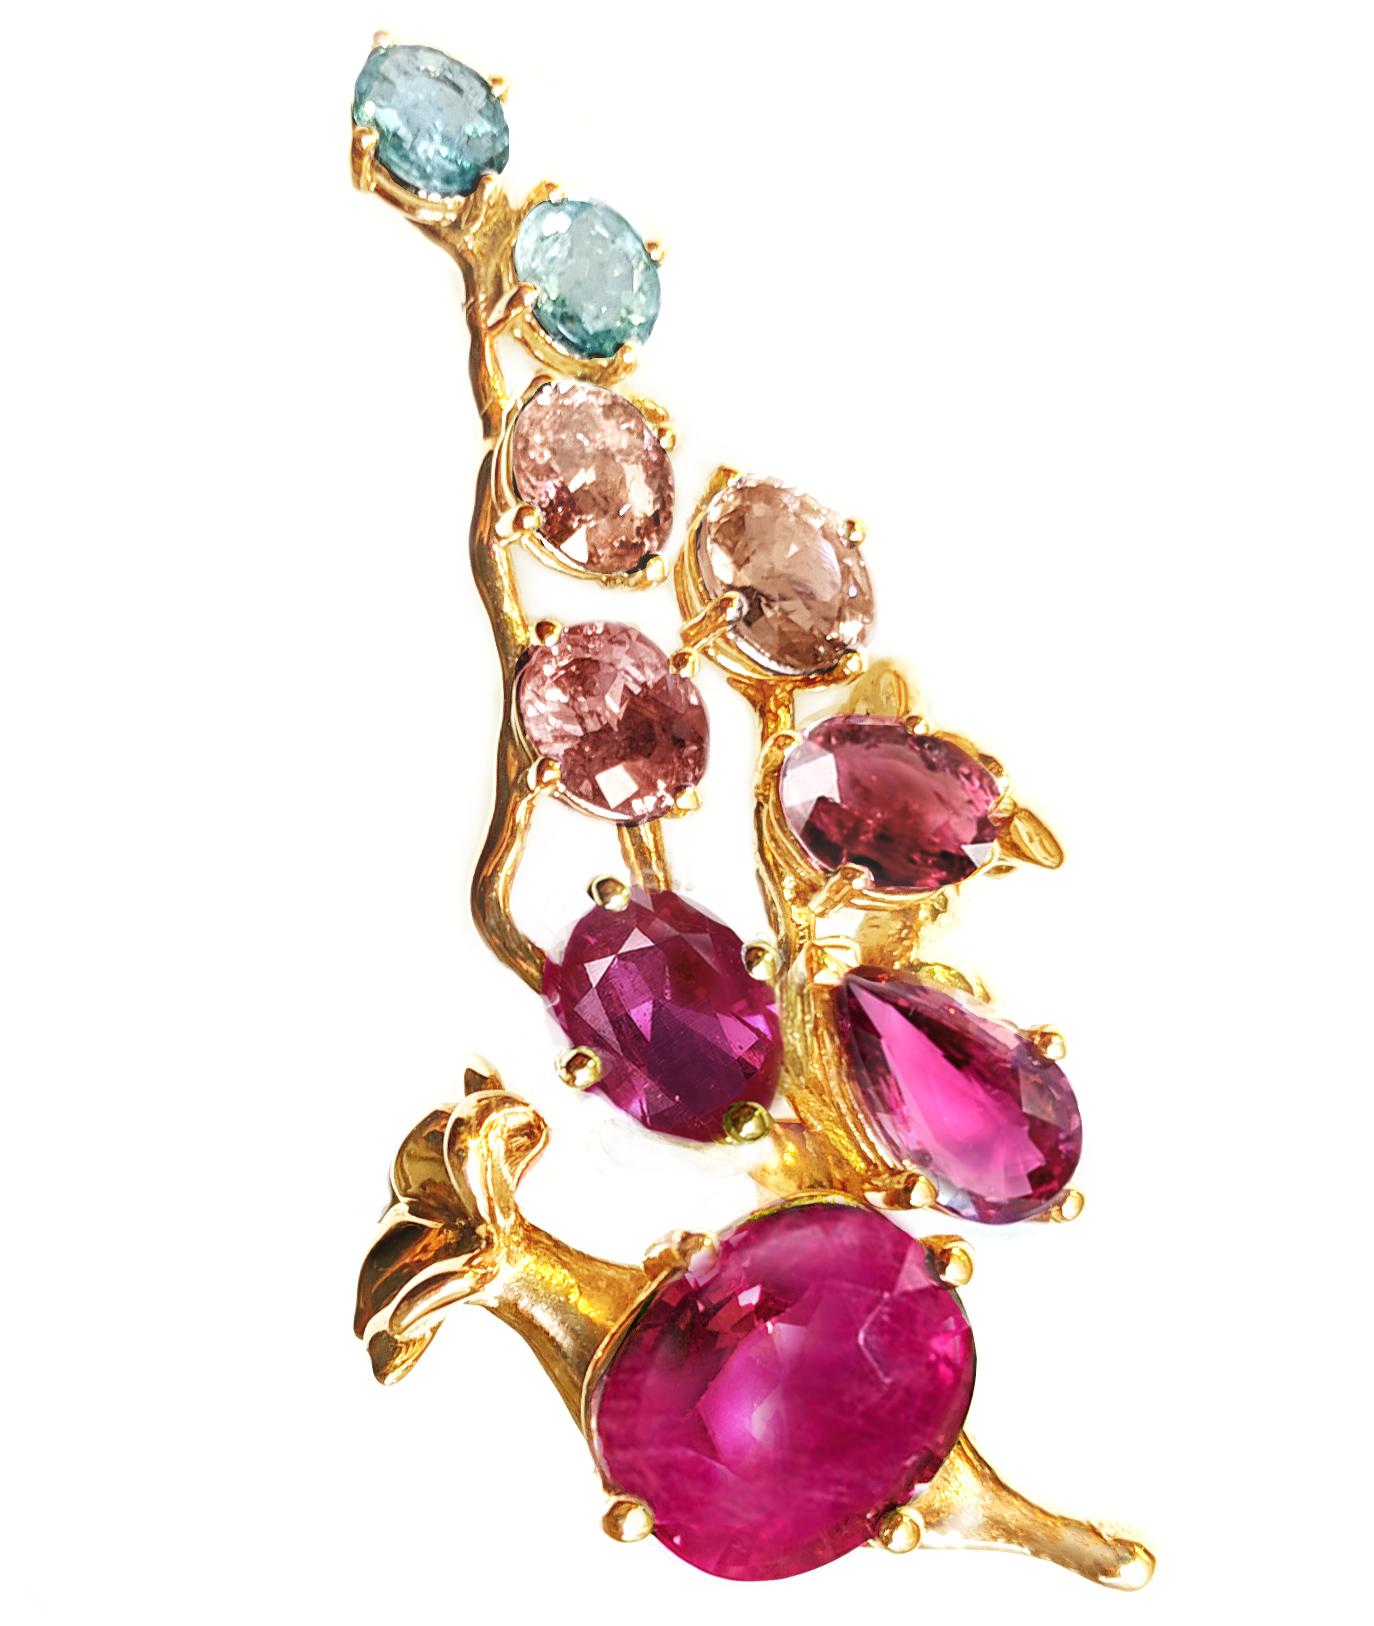 Contemporary Eighteen Karat Yellow Gold Pink Sapphires Pendant Necklace with Malaya Garnets For Sale